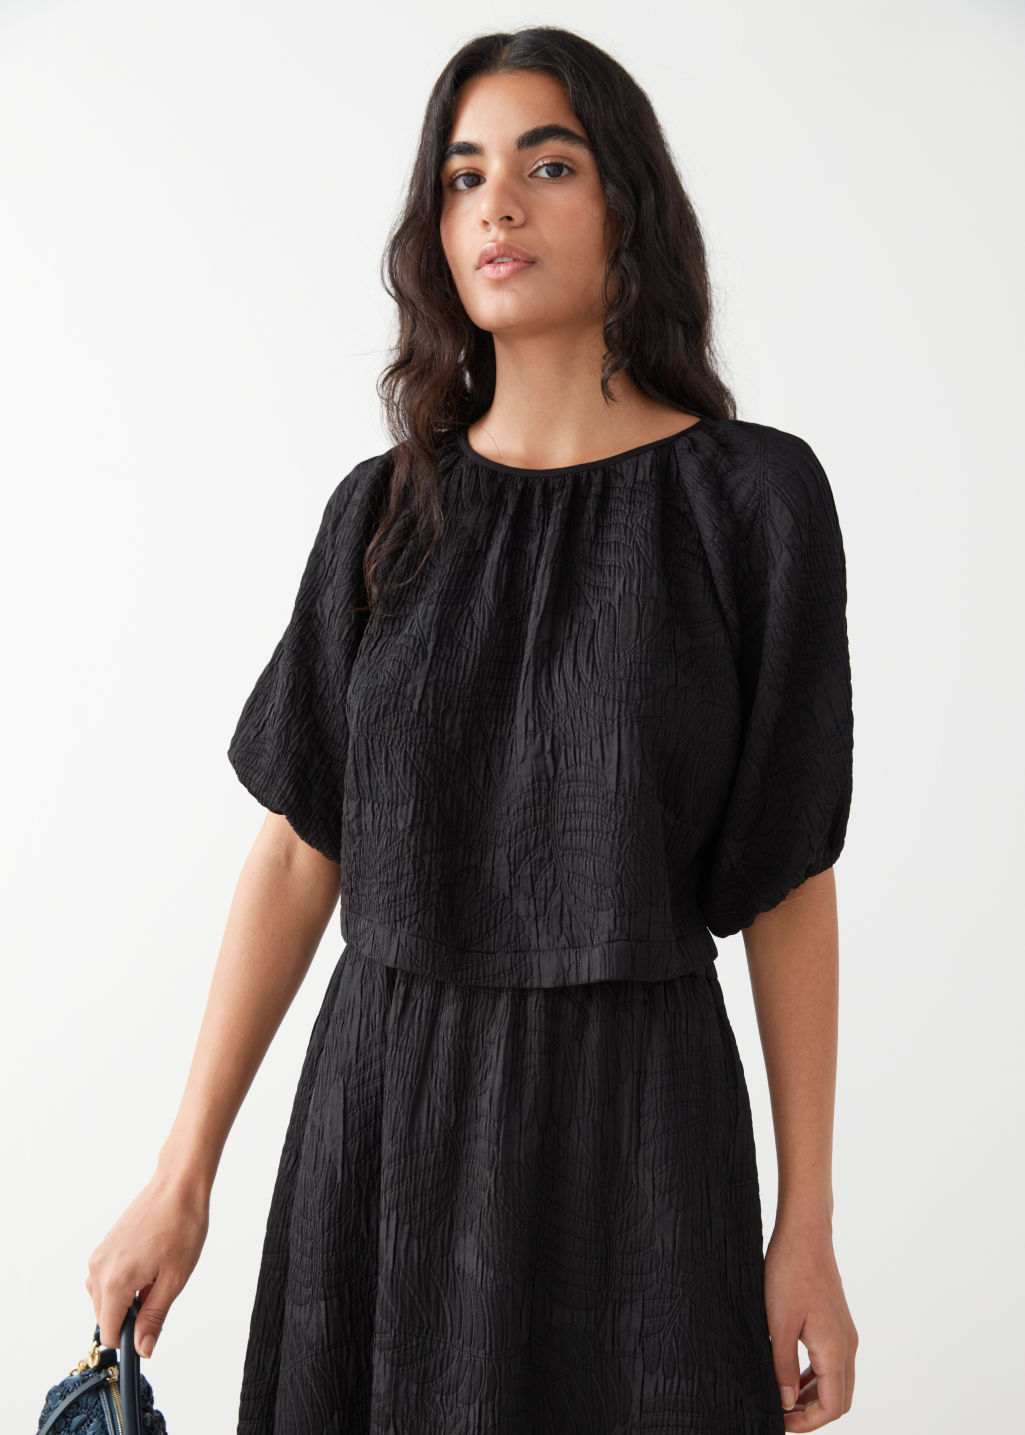 Textured Puff Sleeve Top - Black - Tops & T-shirts - & Other Stories